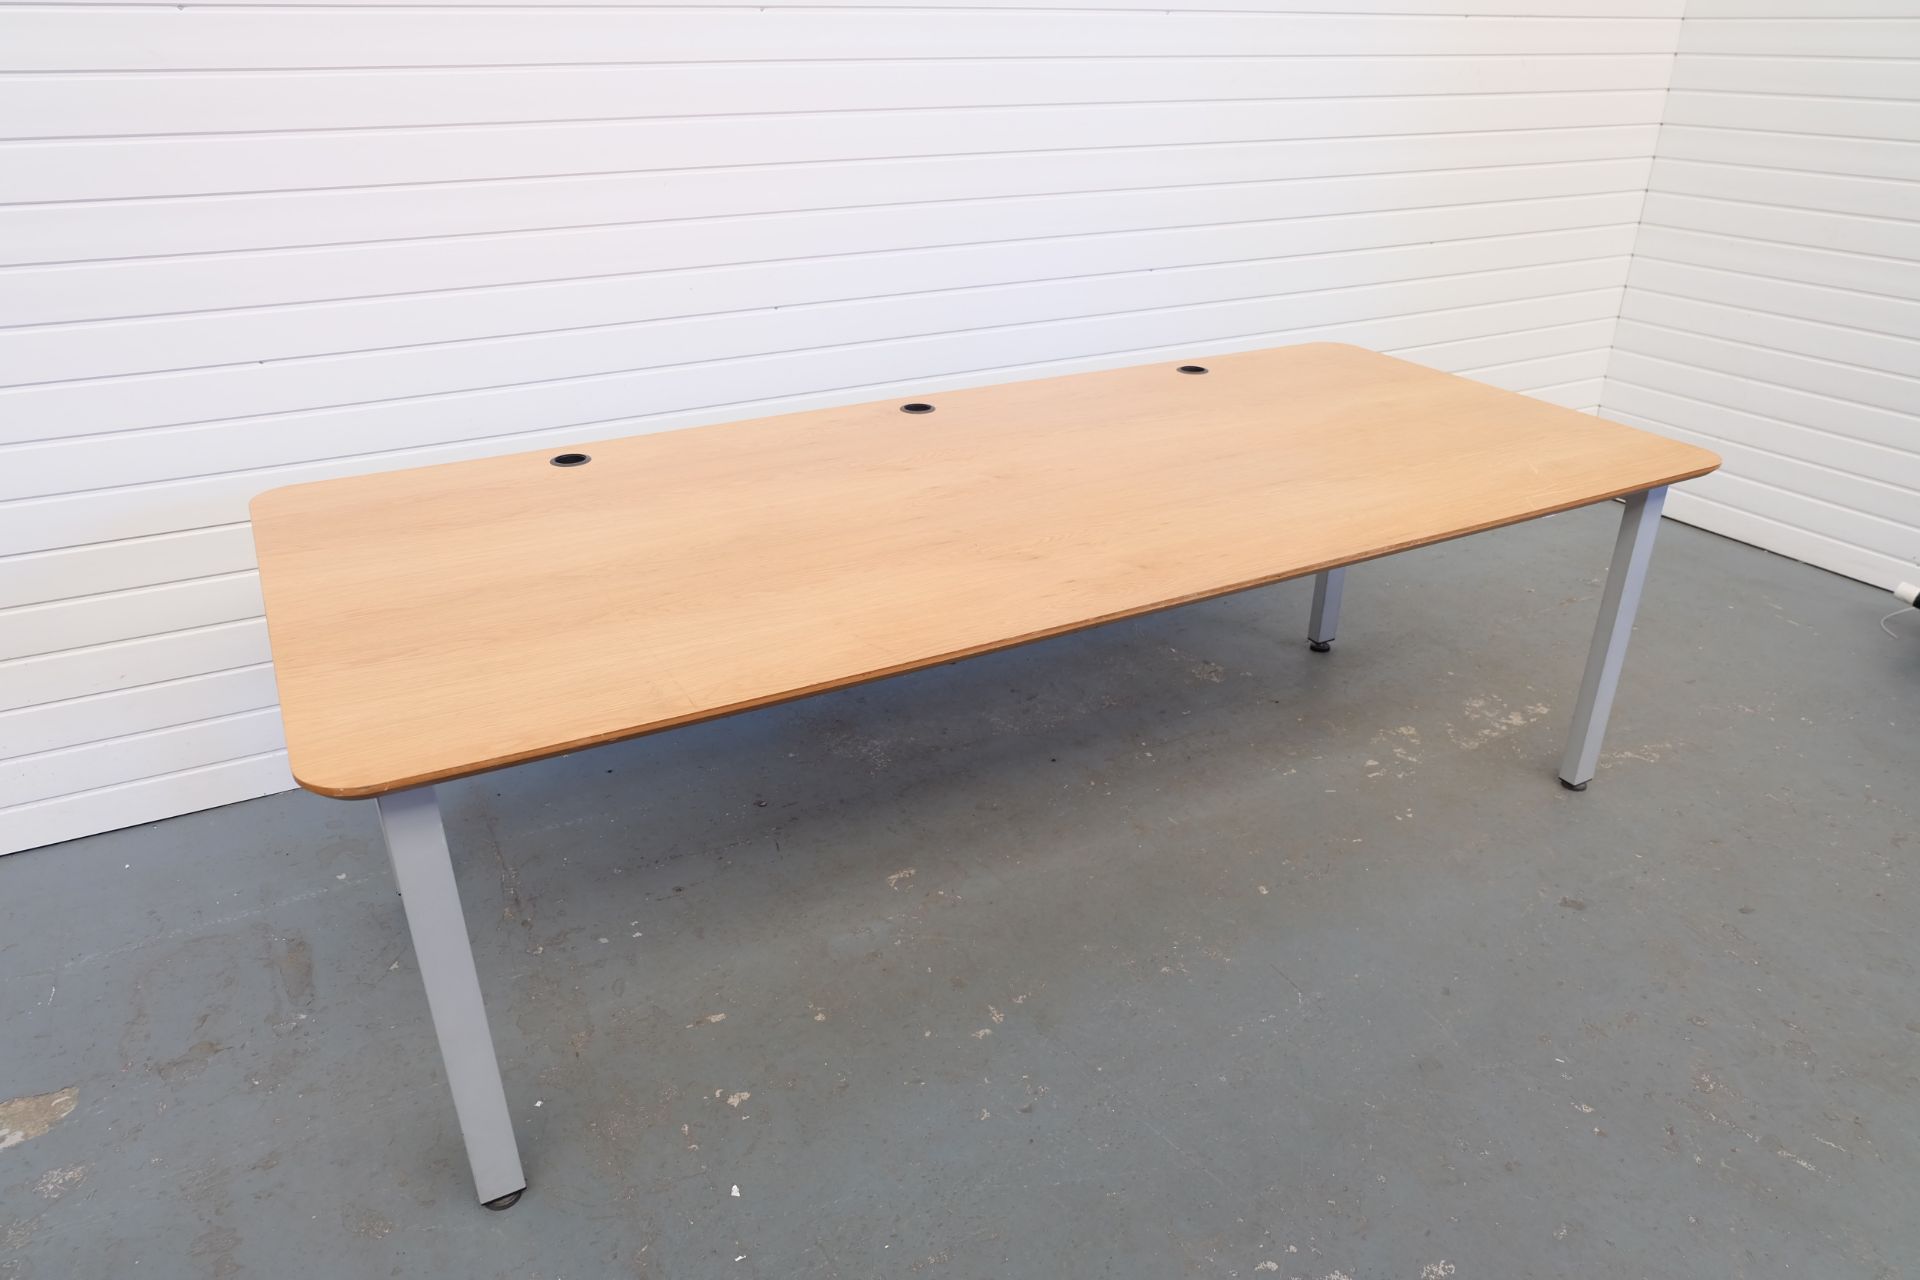 Large Wooden Desk With Metal Legs. 3 x Holes for Wires. Size 2400mm x 1050mm x 725mm High. - Image 2 of 4